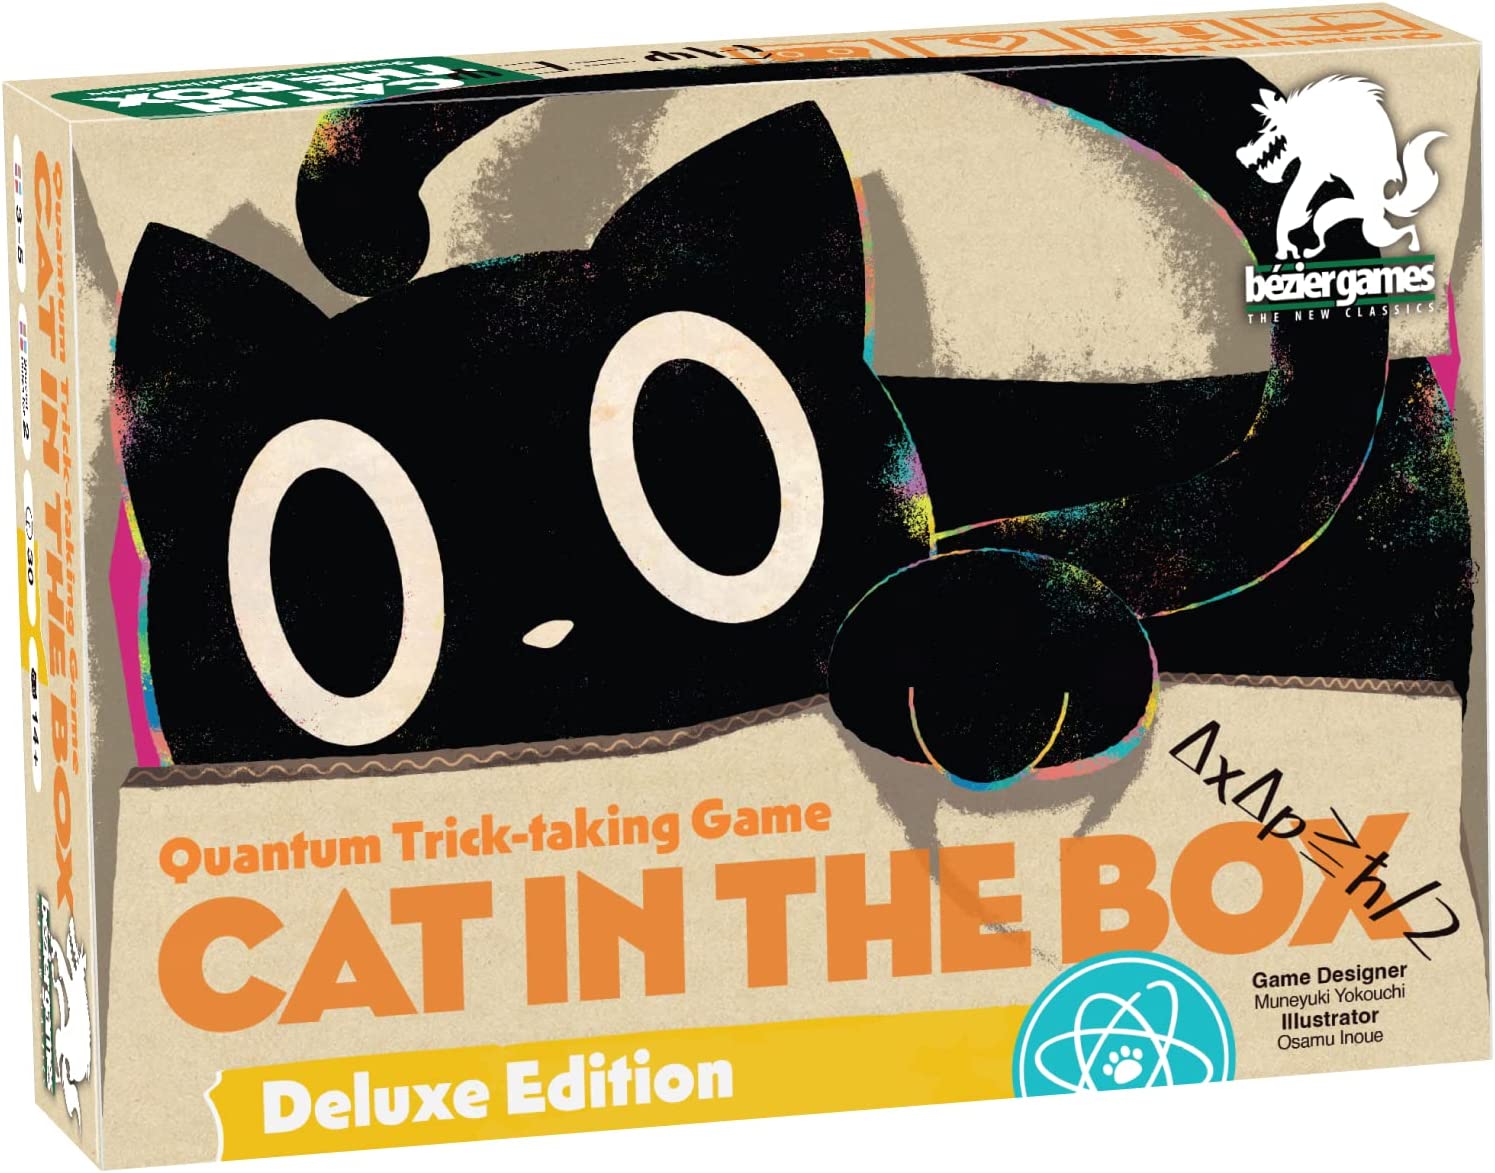 Bezier Games Cat in The Box Deluxe Edition | CCGPrime